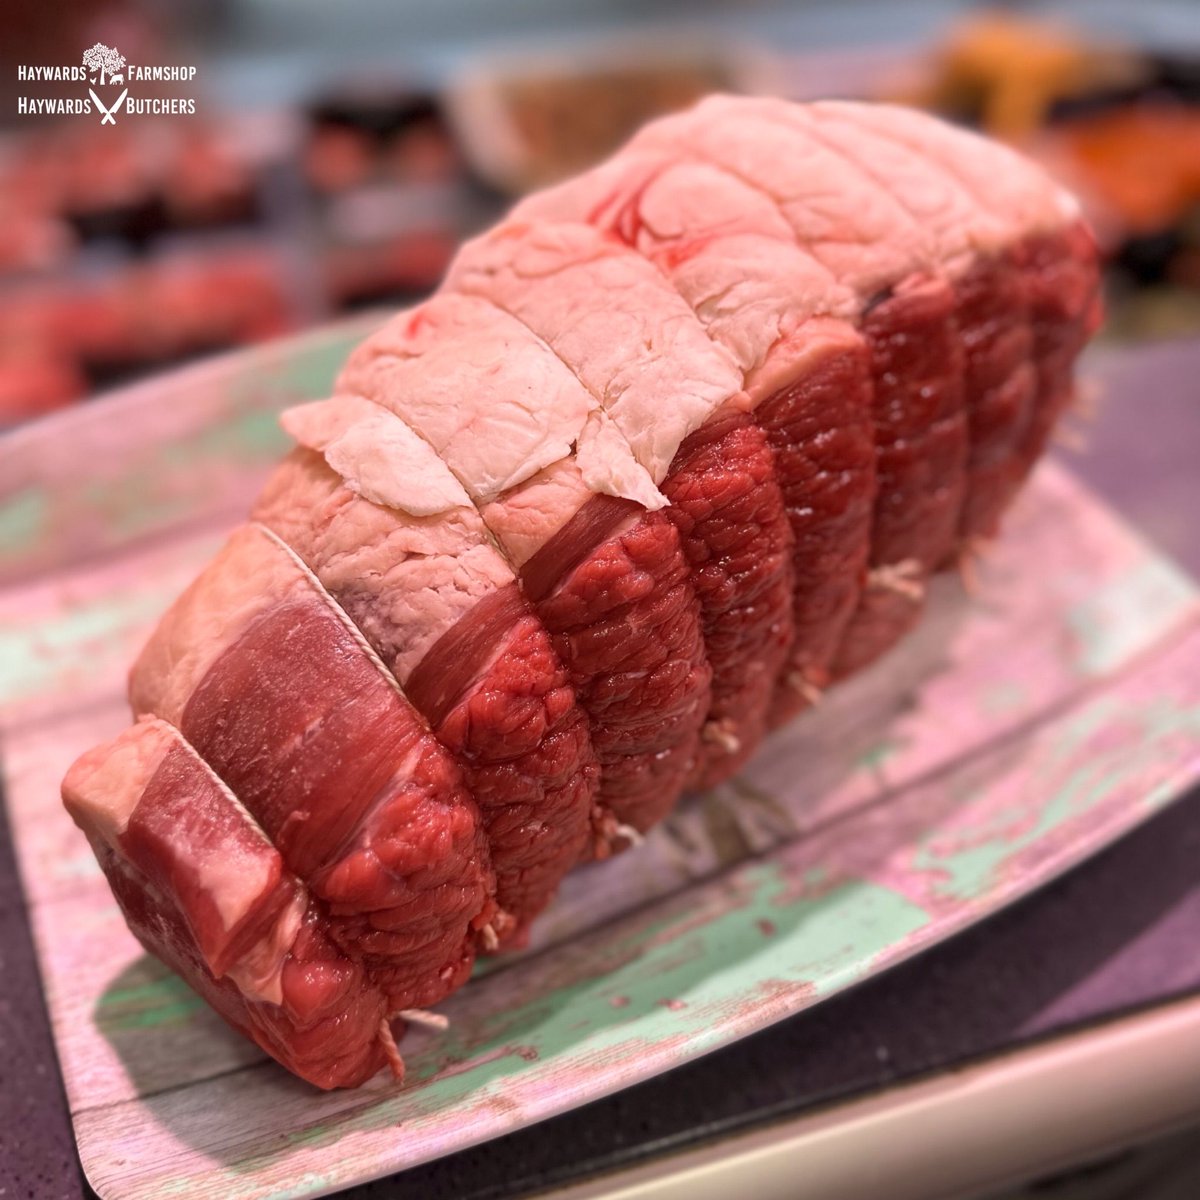 🍖✨Indulge in Sunday perfection with our succulent beef topside! Impeccably tender & bursting with flavour, it's the star of your roast dinner. Bring the family together and relish in the deliciousness #SundayRoastJoy #BeefTopside #FamilyFeast #ShopLocal #Tonbridge #Haywards1990